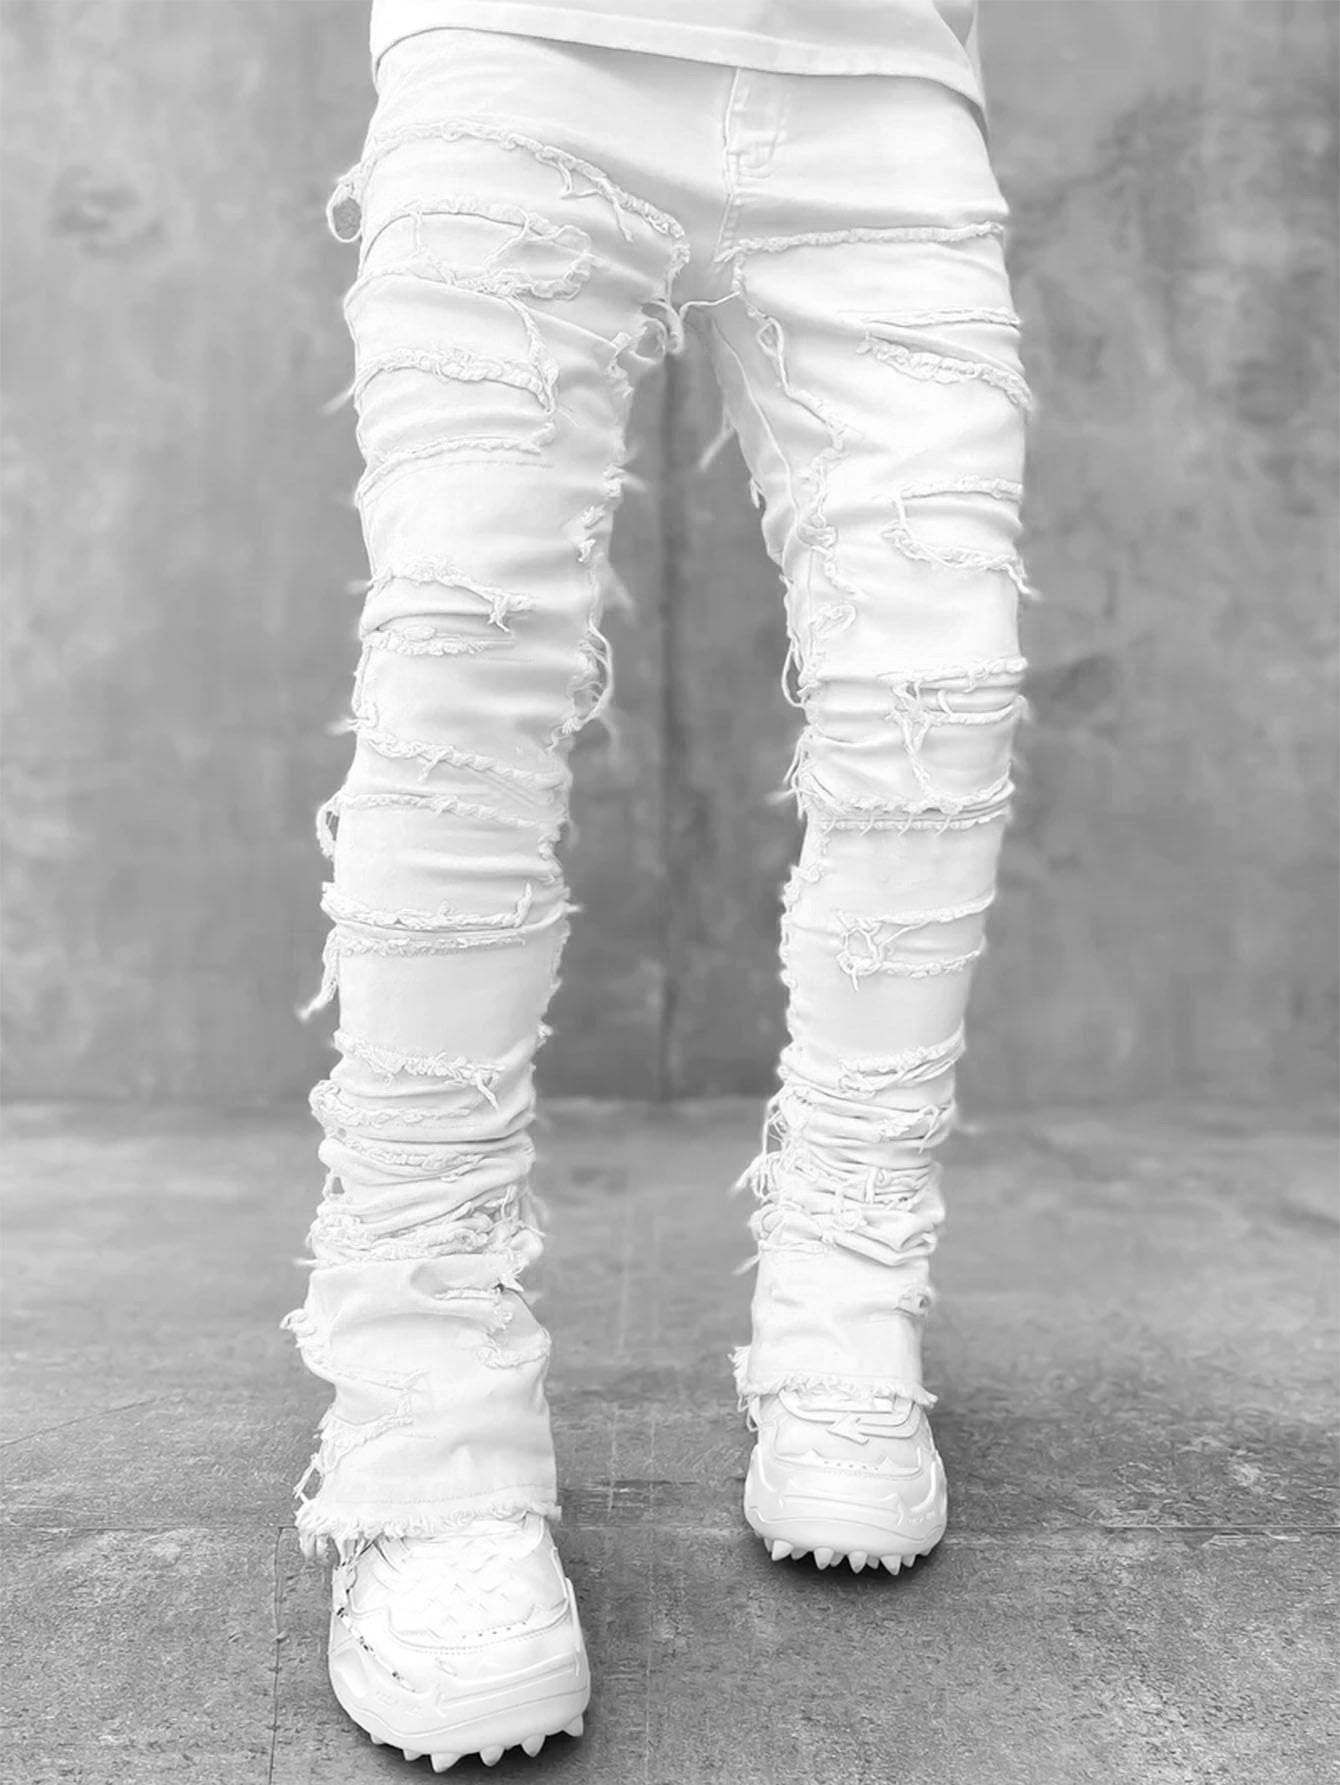 Men Trousers Individual Patched Pants Long Tight Fit Stacked Jeans for Mens Clothing